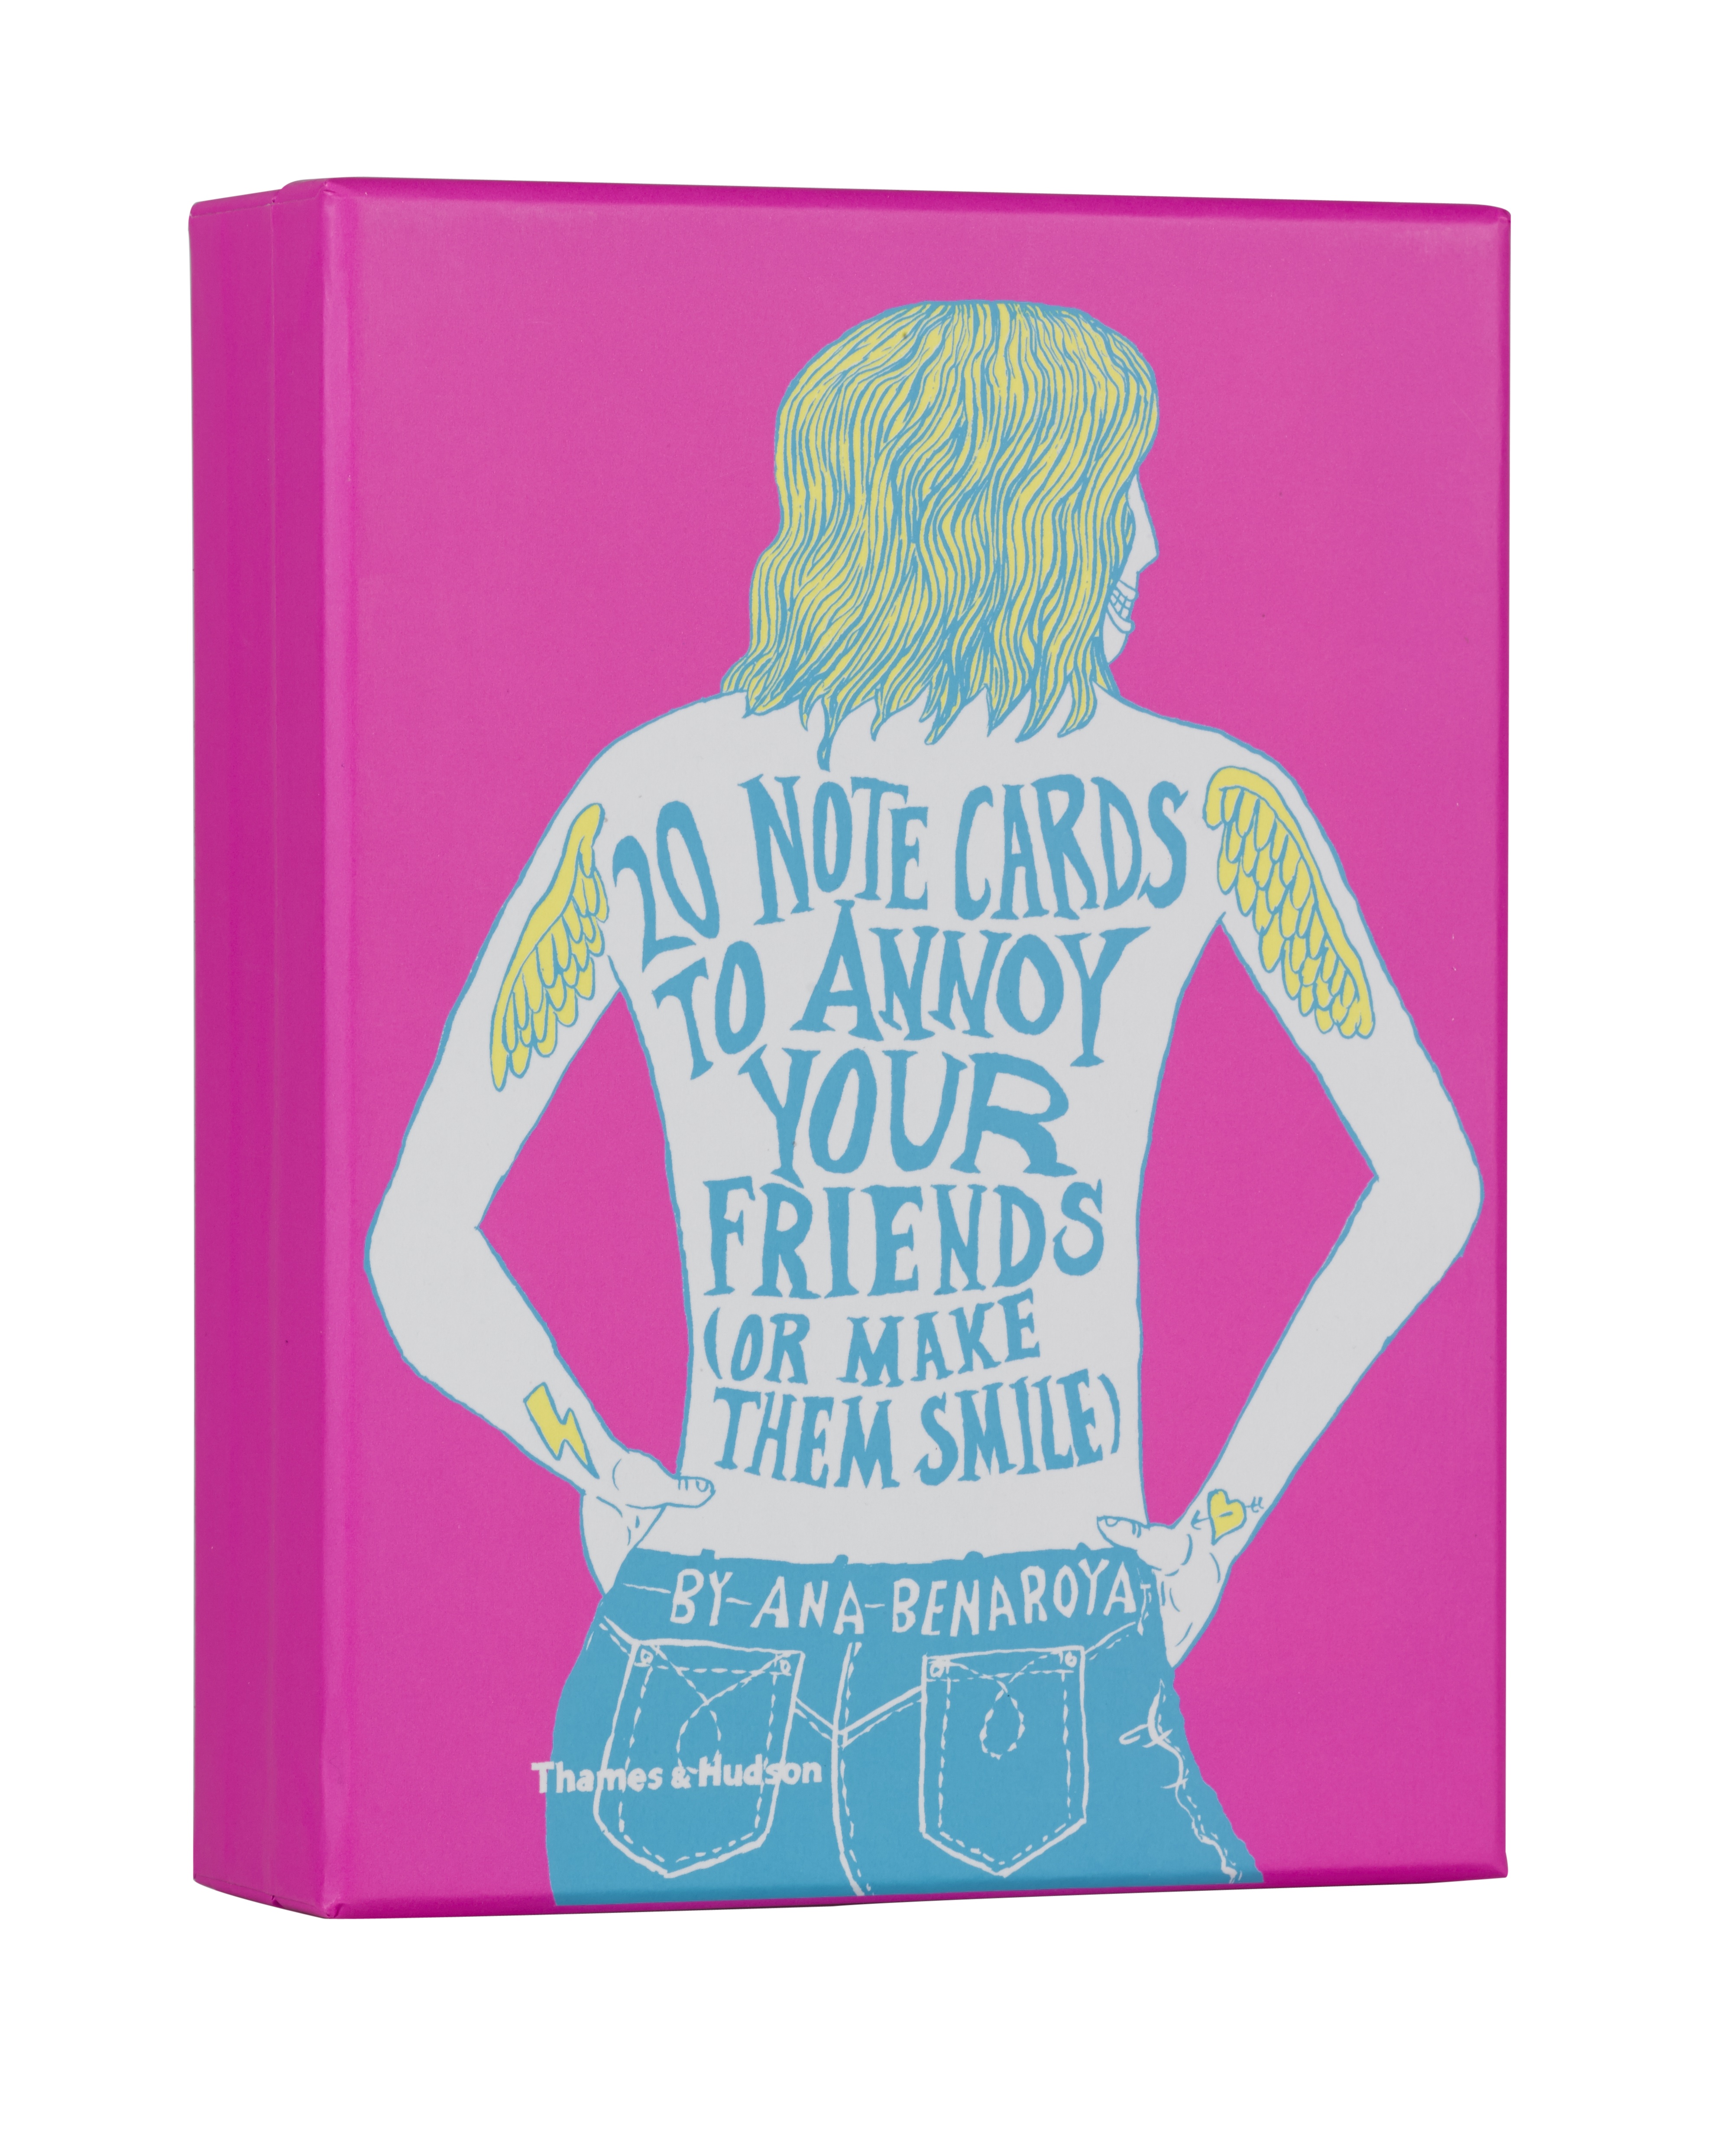 20 Note Cards to Annoy Your Friends